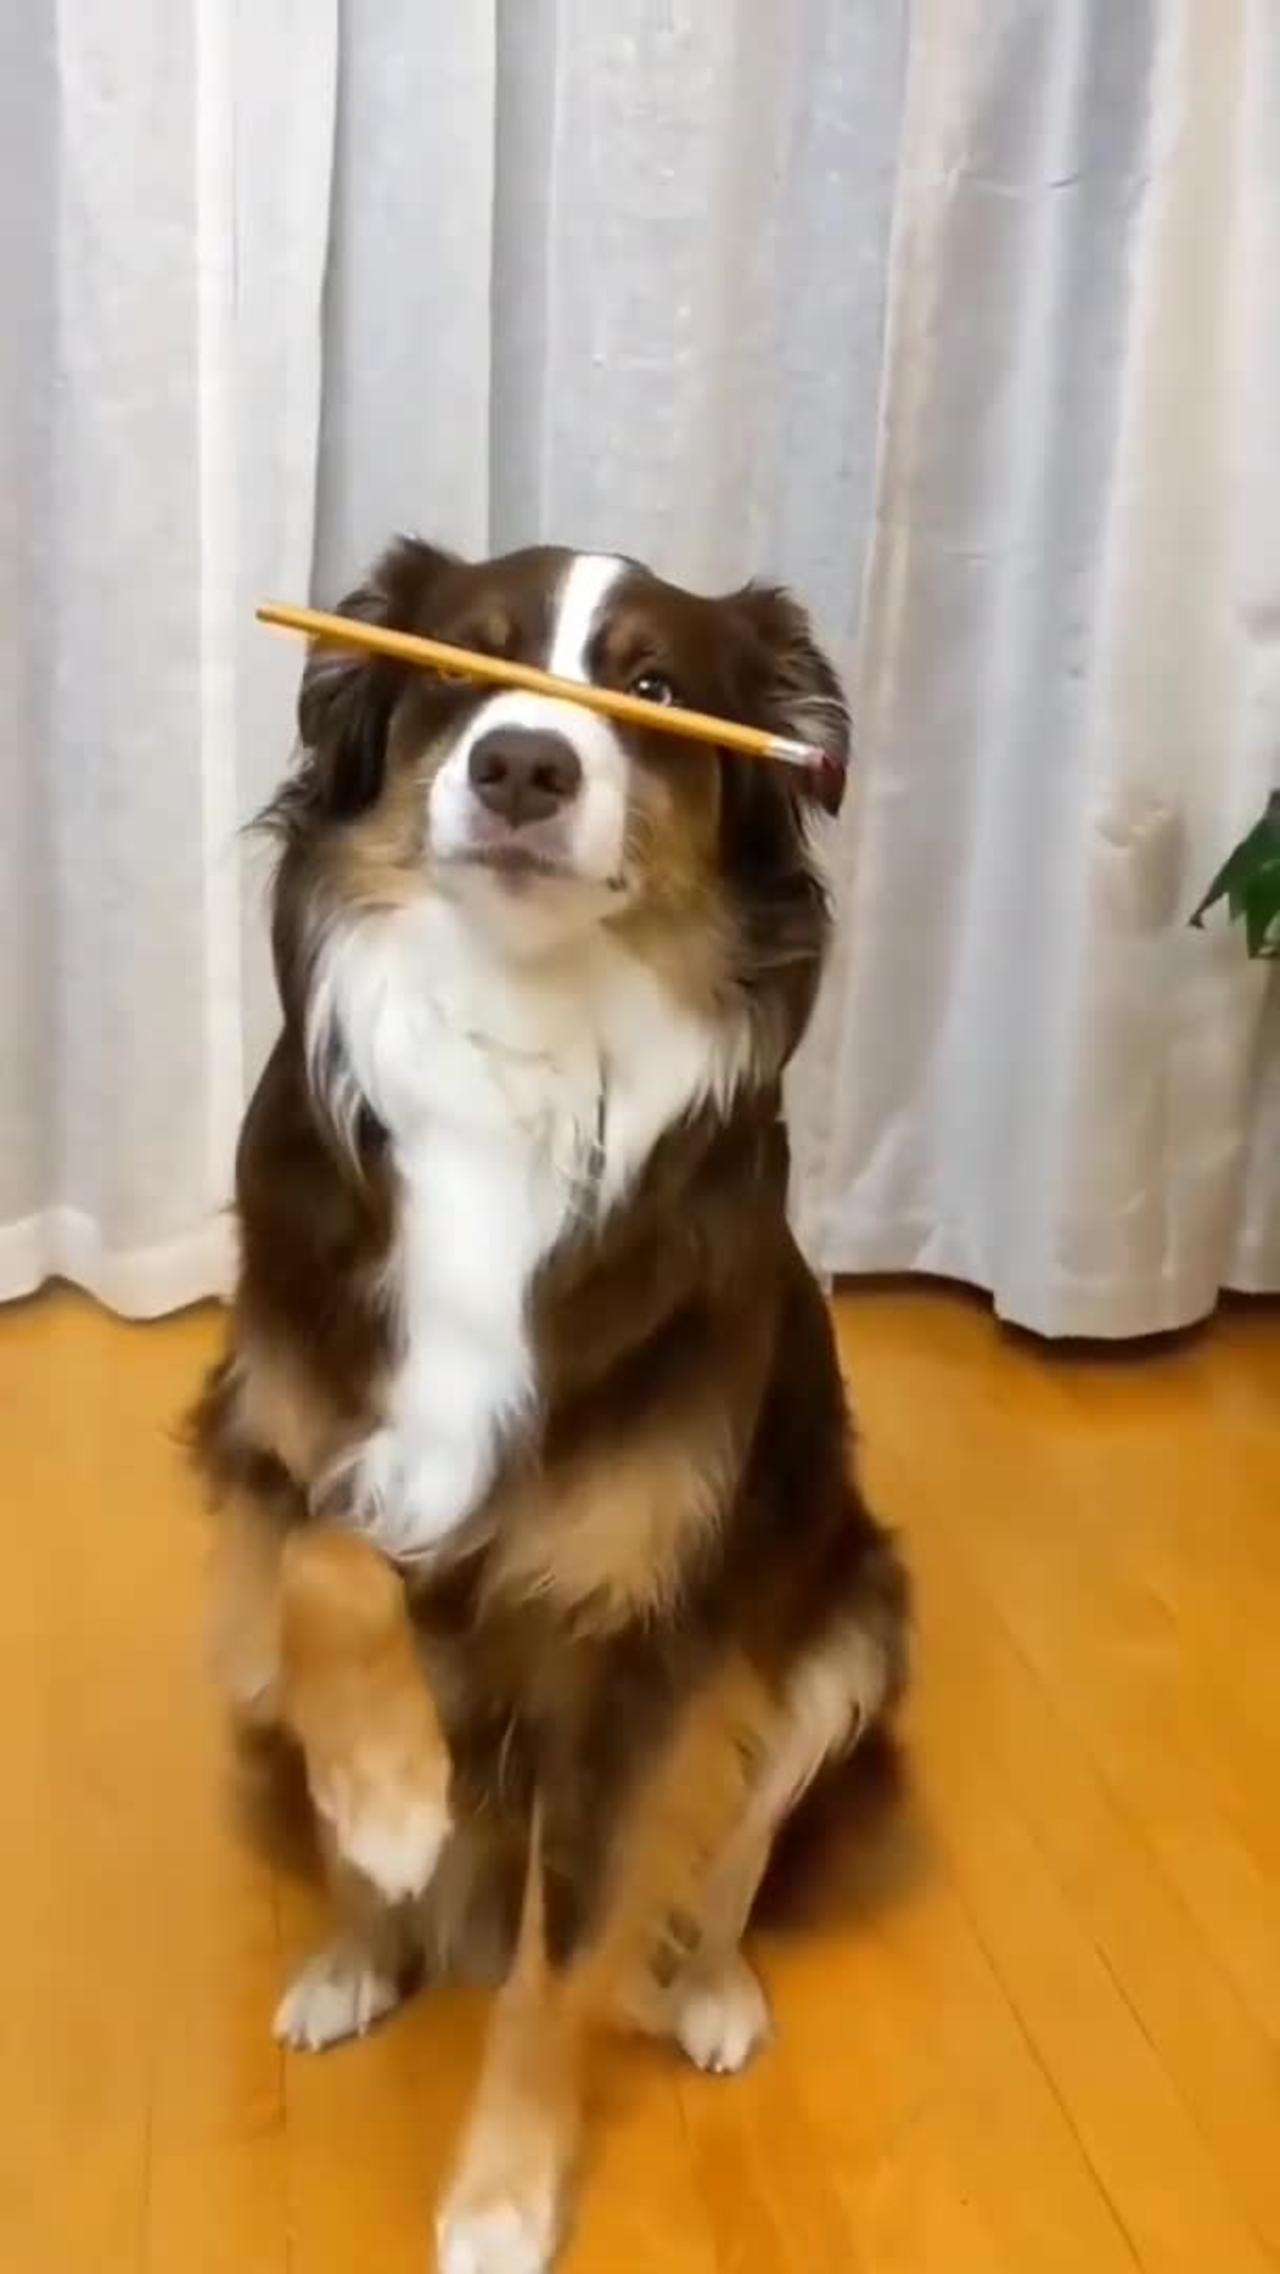 Dogs vs Sticks, Never Ending Entertainment | Funniest Dog Videos #shorts#dog# pets #puppy#animals